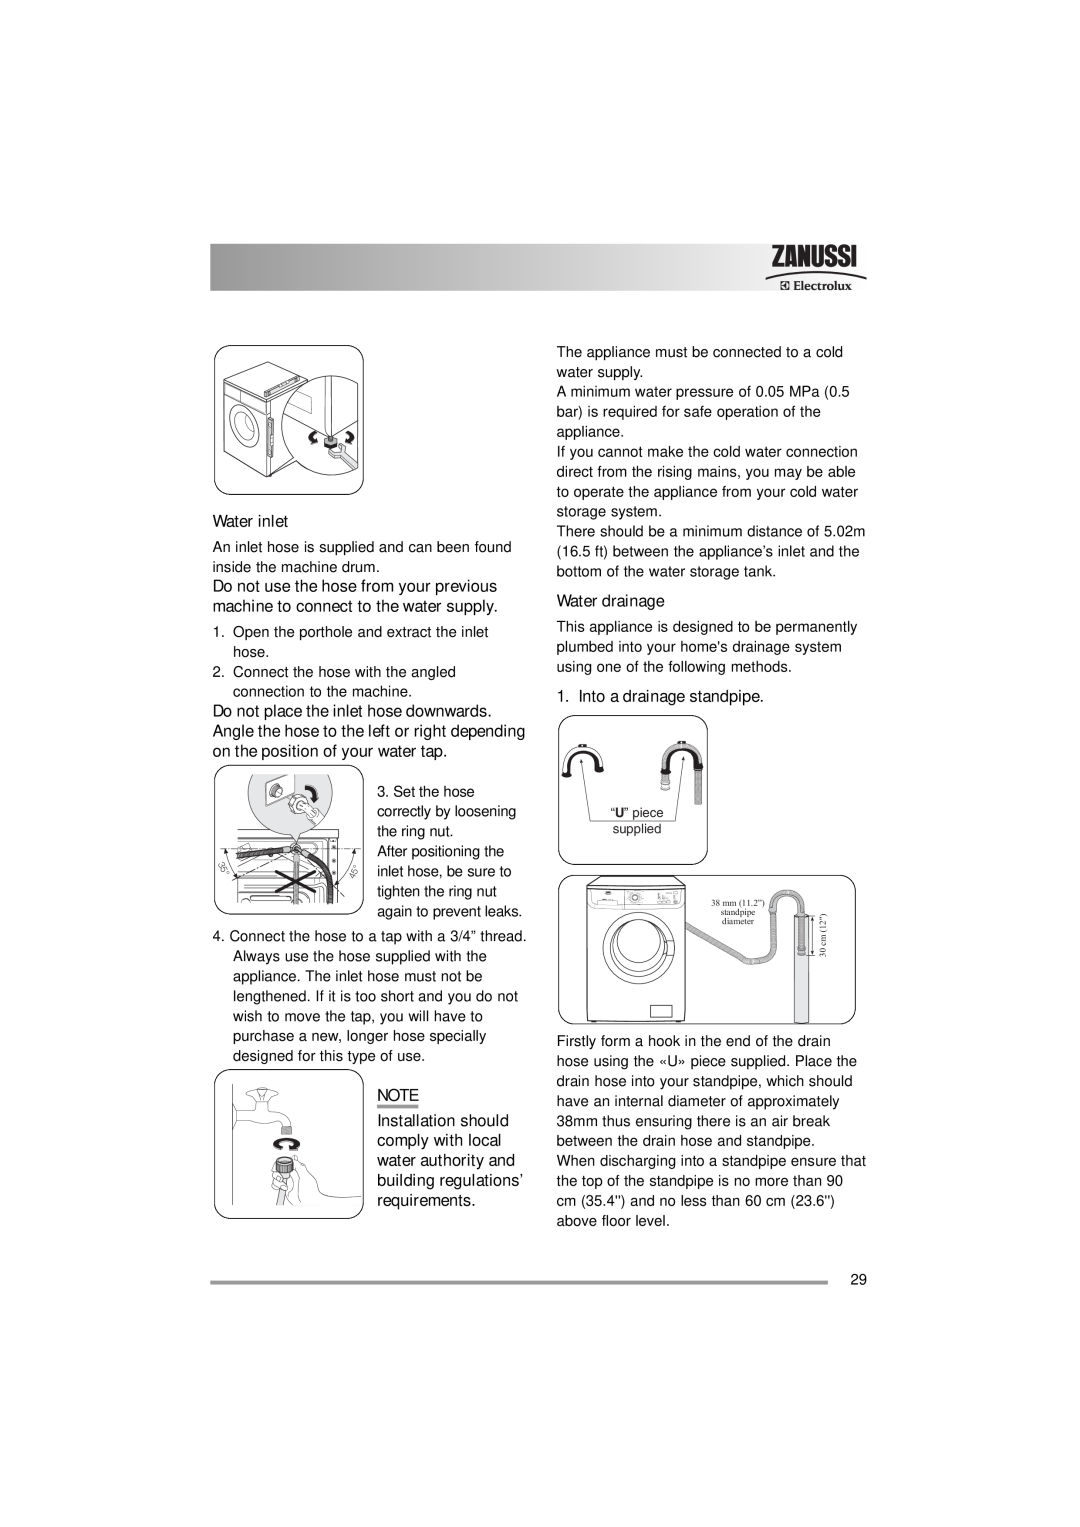 Zanussi ZWF 16581 user manual Water inlet, Water drainage, Into a drainage standpipe 